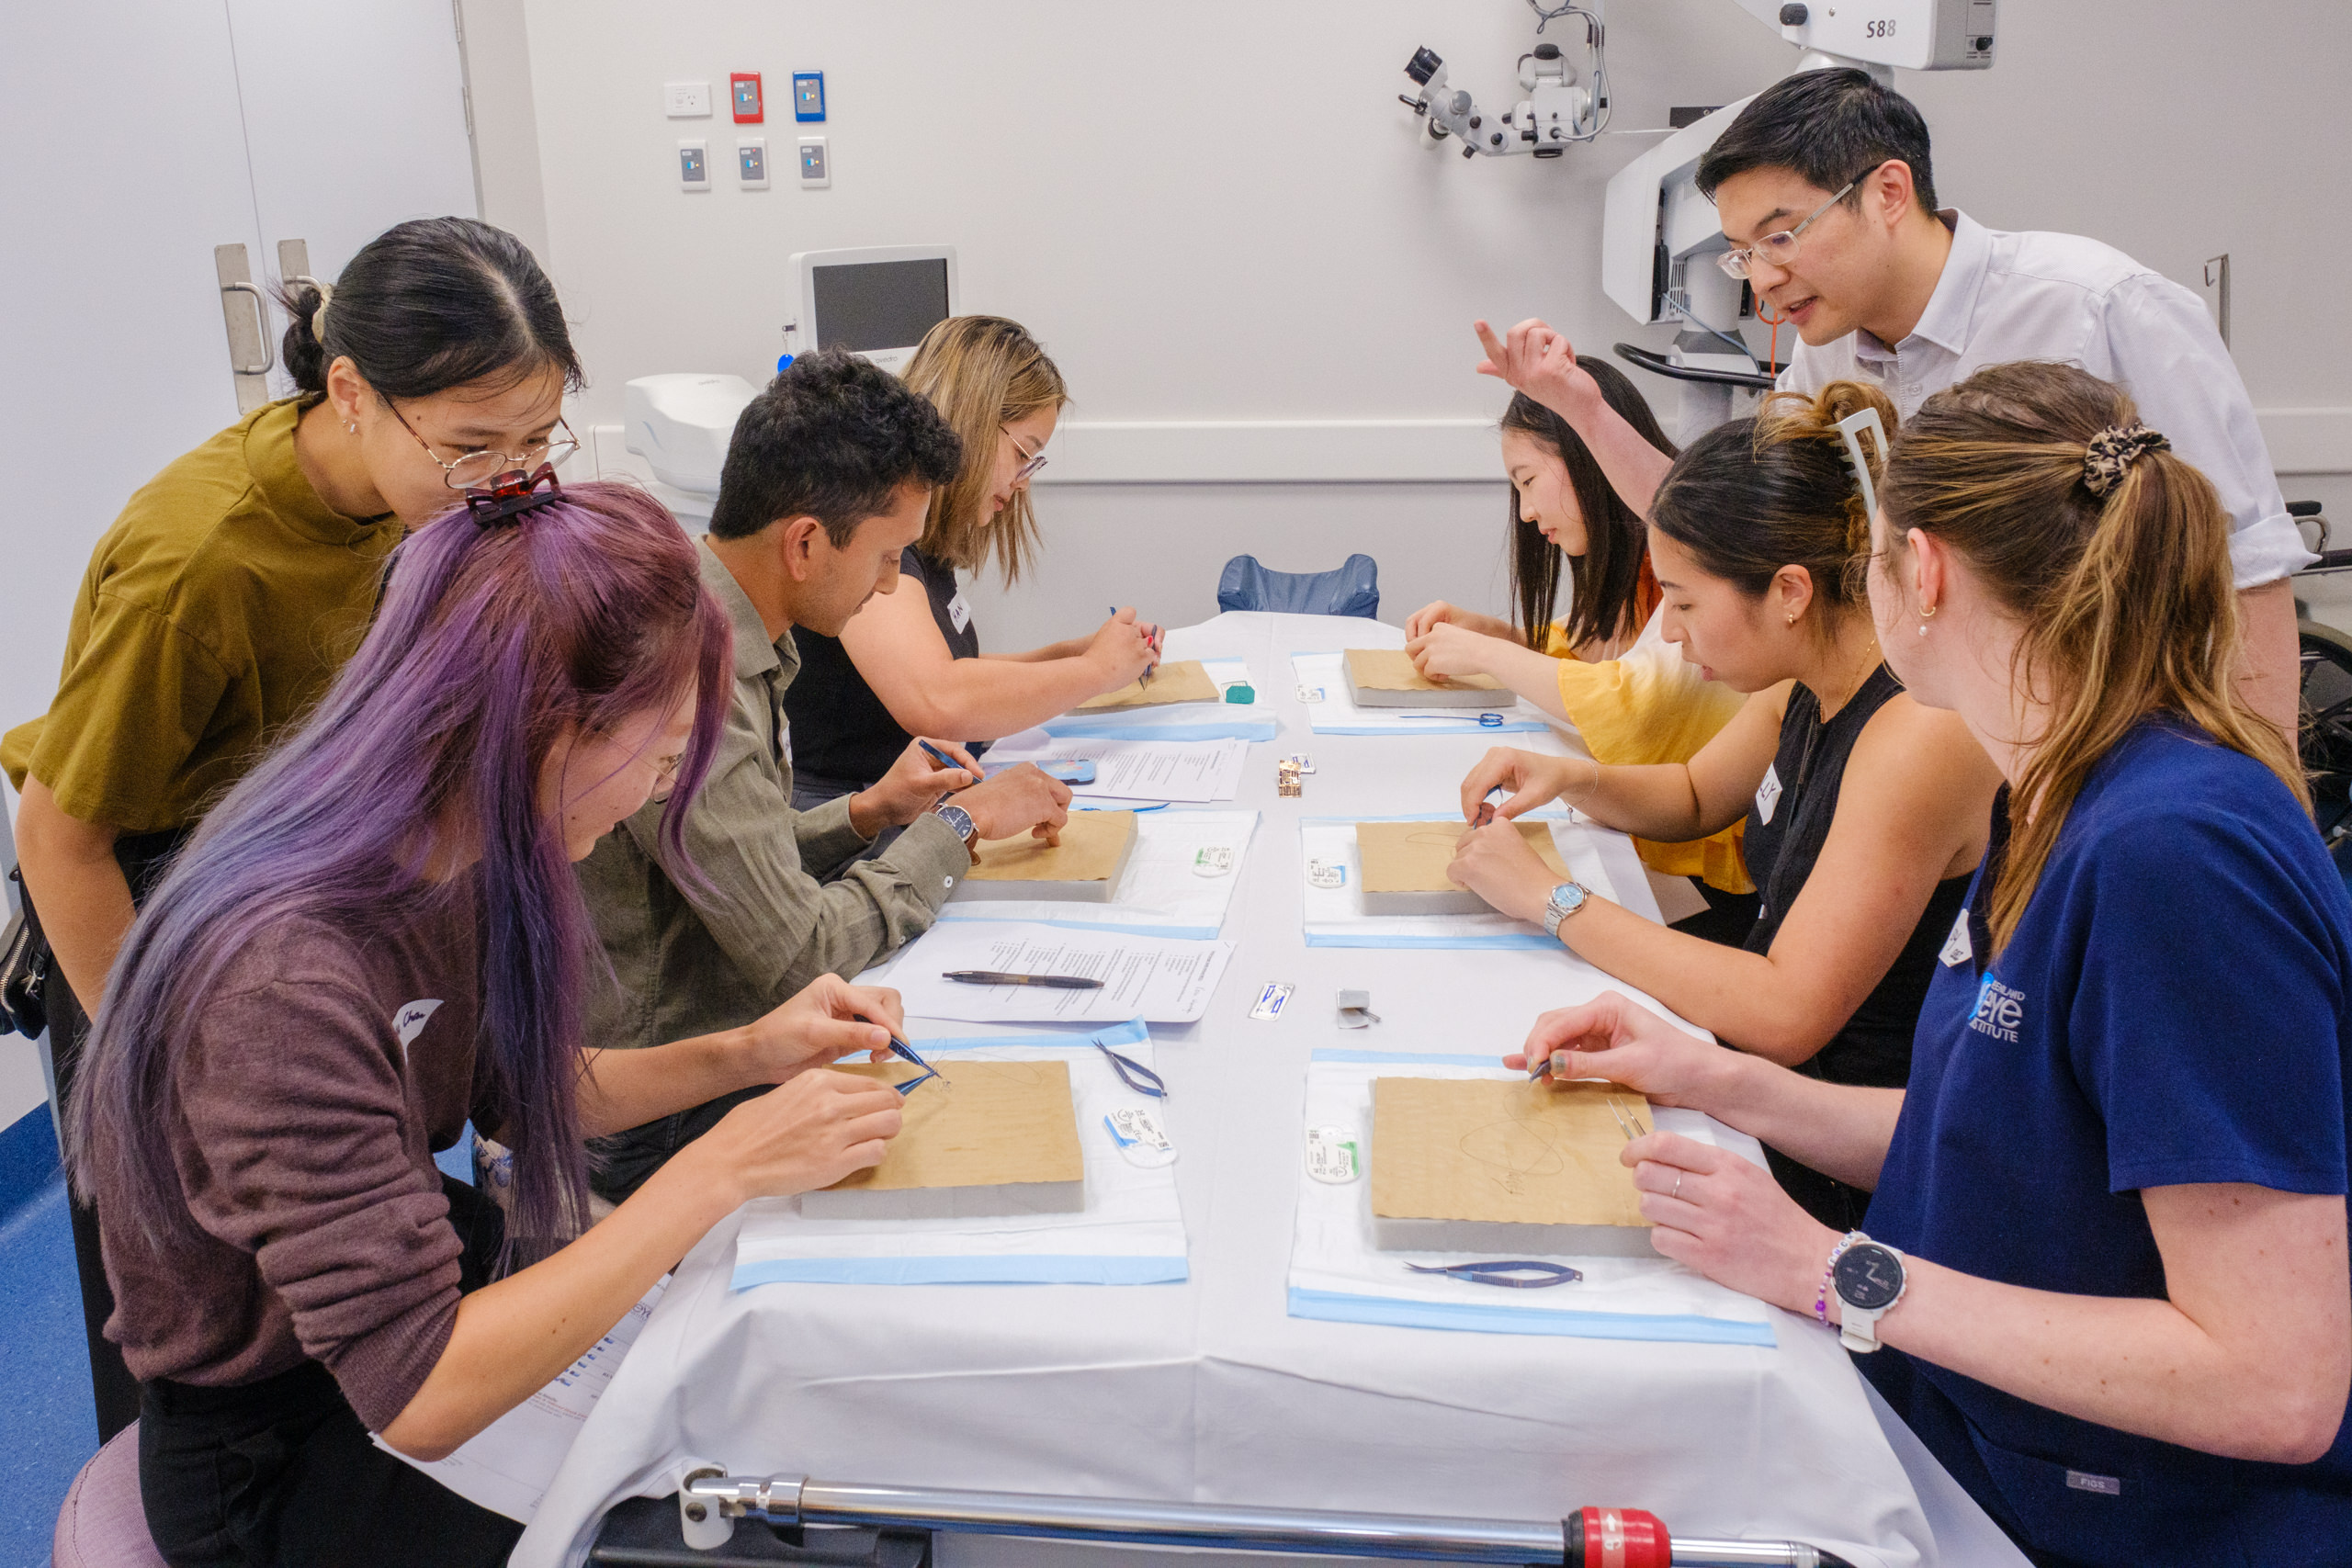 Seven people sit or stand around a table with square foam blocks in front of them, using surgical implements to practise suturing. A man with short dark hair and glasses lifts his hand to demonstrate the suturing technique.